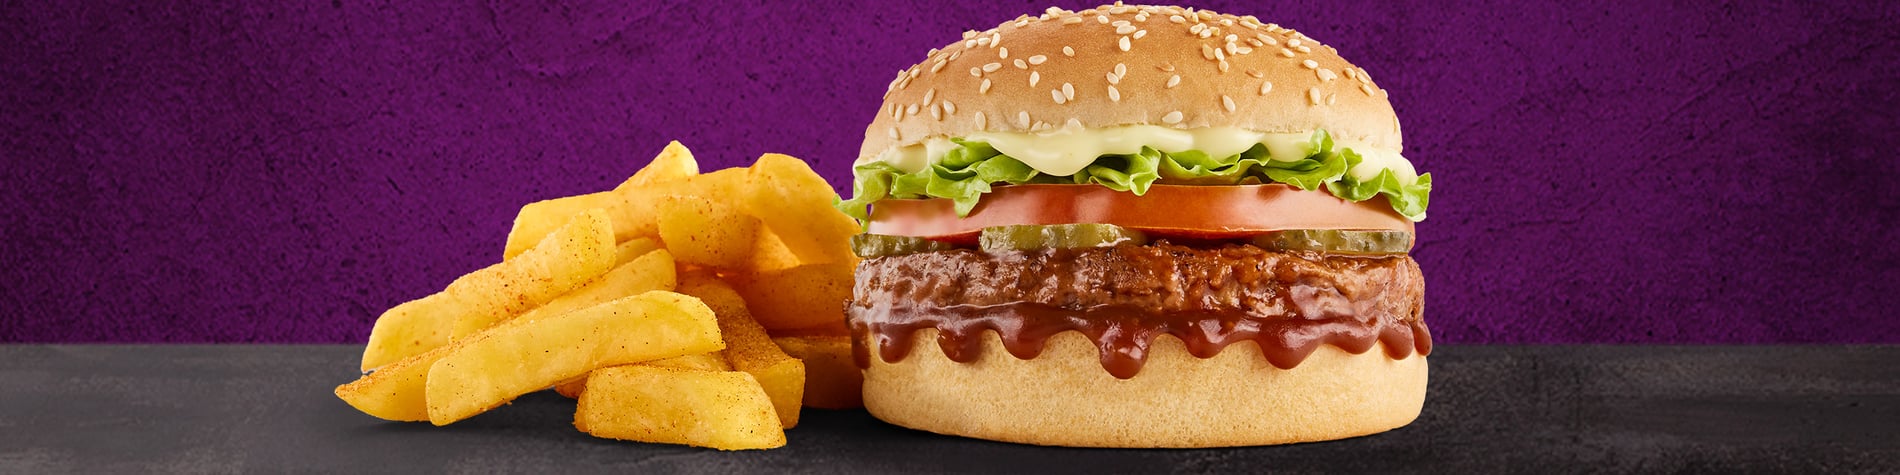 The NEW Mo’MjojoTM Burger Meal from Steers® Malmesbury. 2 Flame-Grilled pure beef patties, pineapple, macon, tomato, lettuce, and small Famous Hand-Cut Chips, on a purple background.